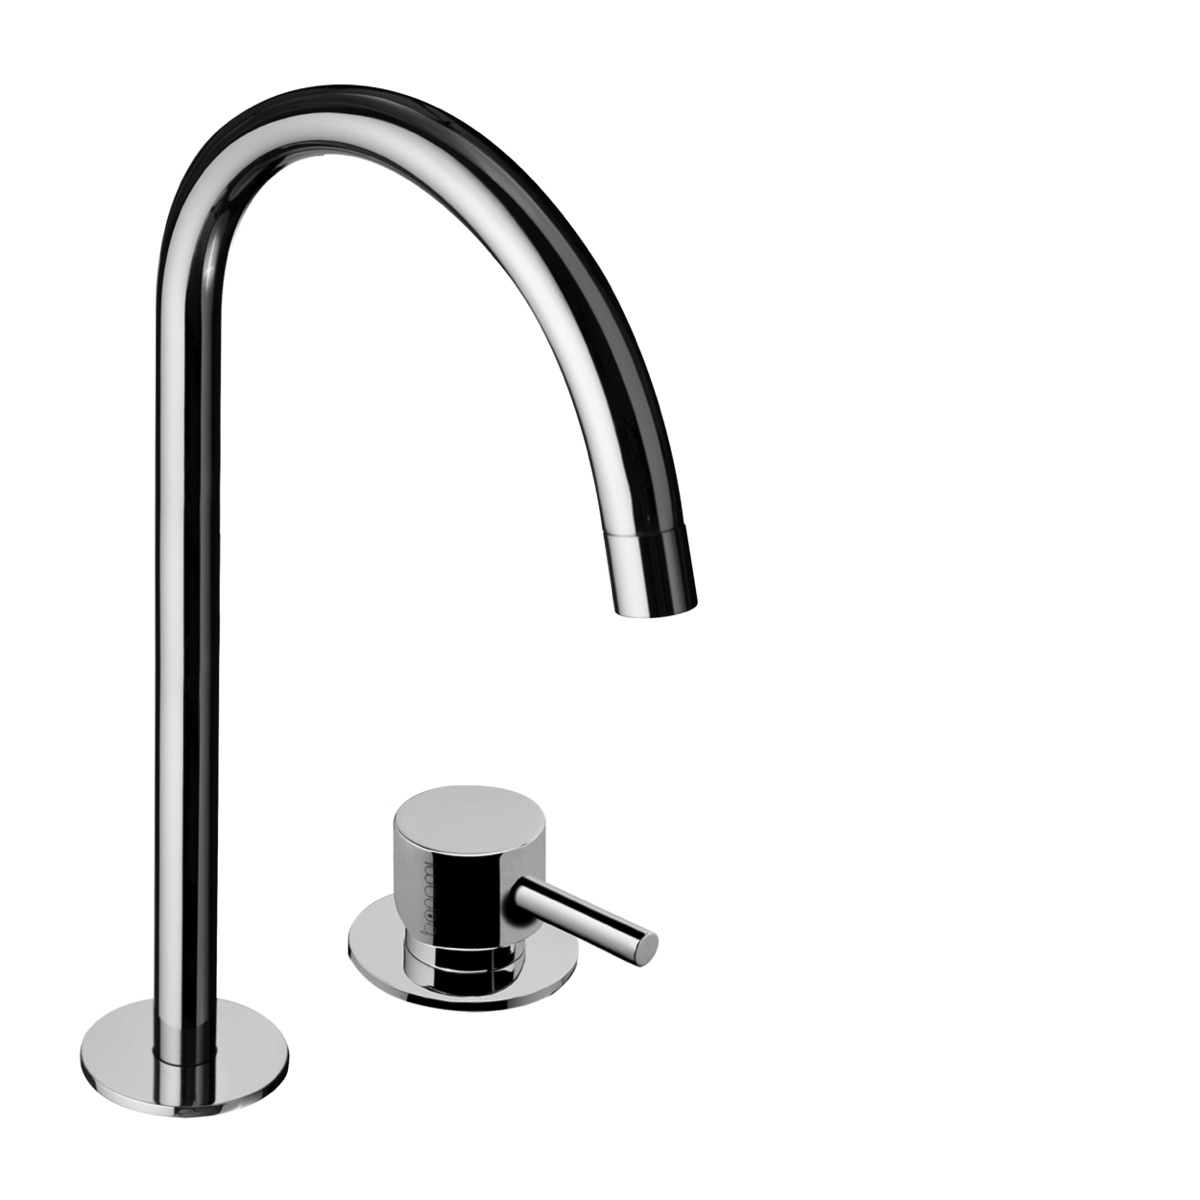 2 hole deck mounted basin mixer with 383 mm spout ø 18 mm with waste